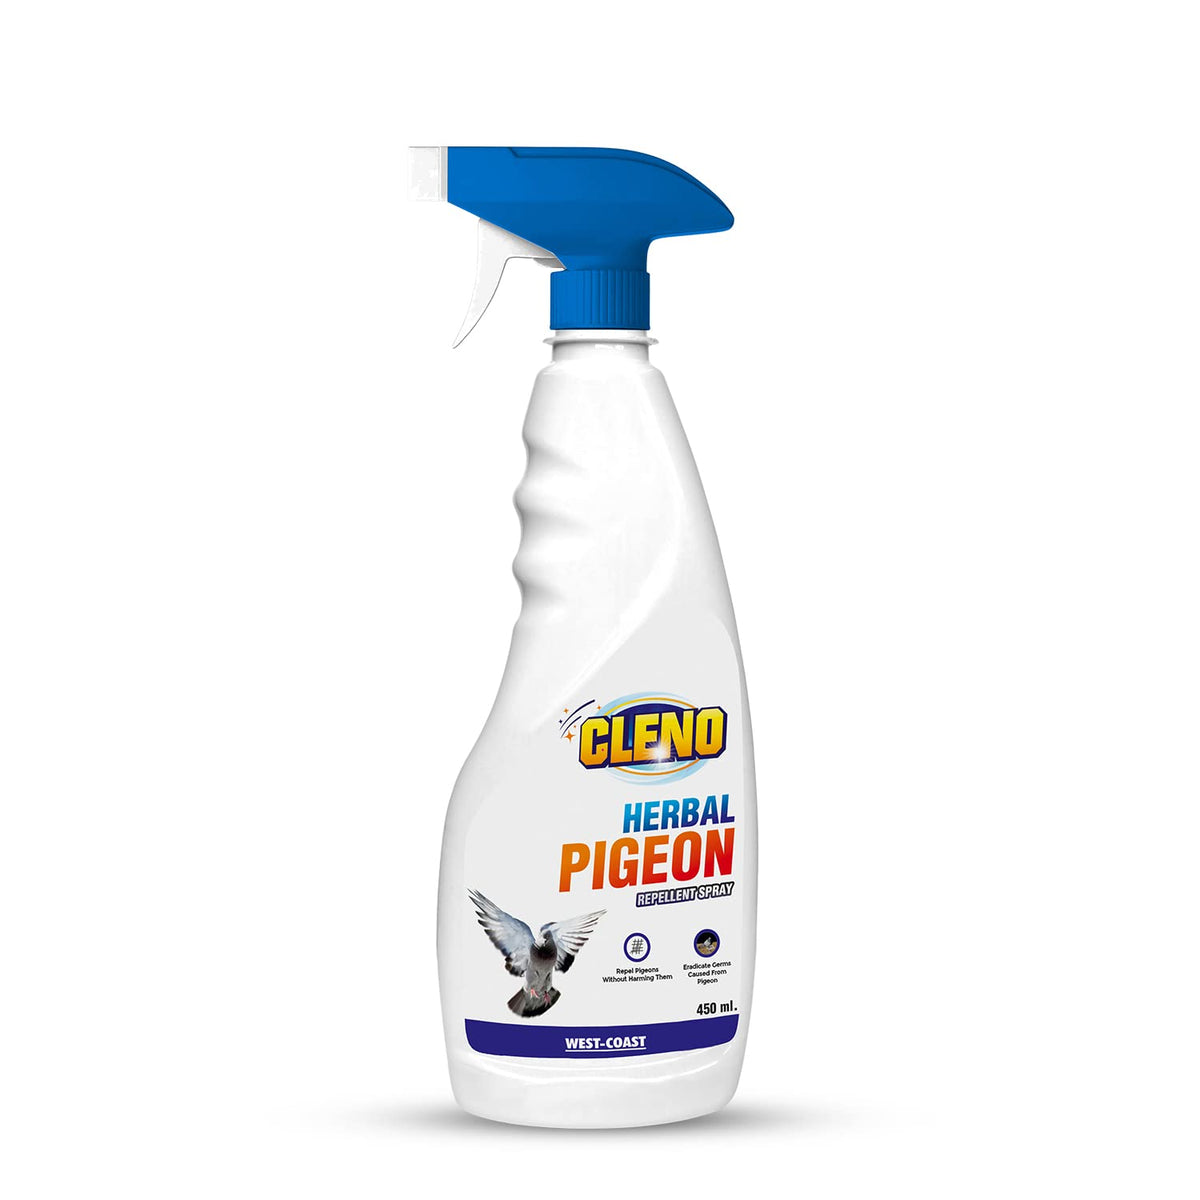 Cleno Herbal Pigeon Repellent Spray | Better Than Anti Pigeon Spikes | Bird Repellent – 450 ml (Ready to Use)